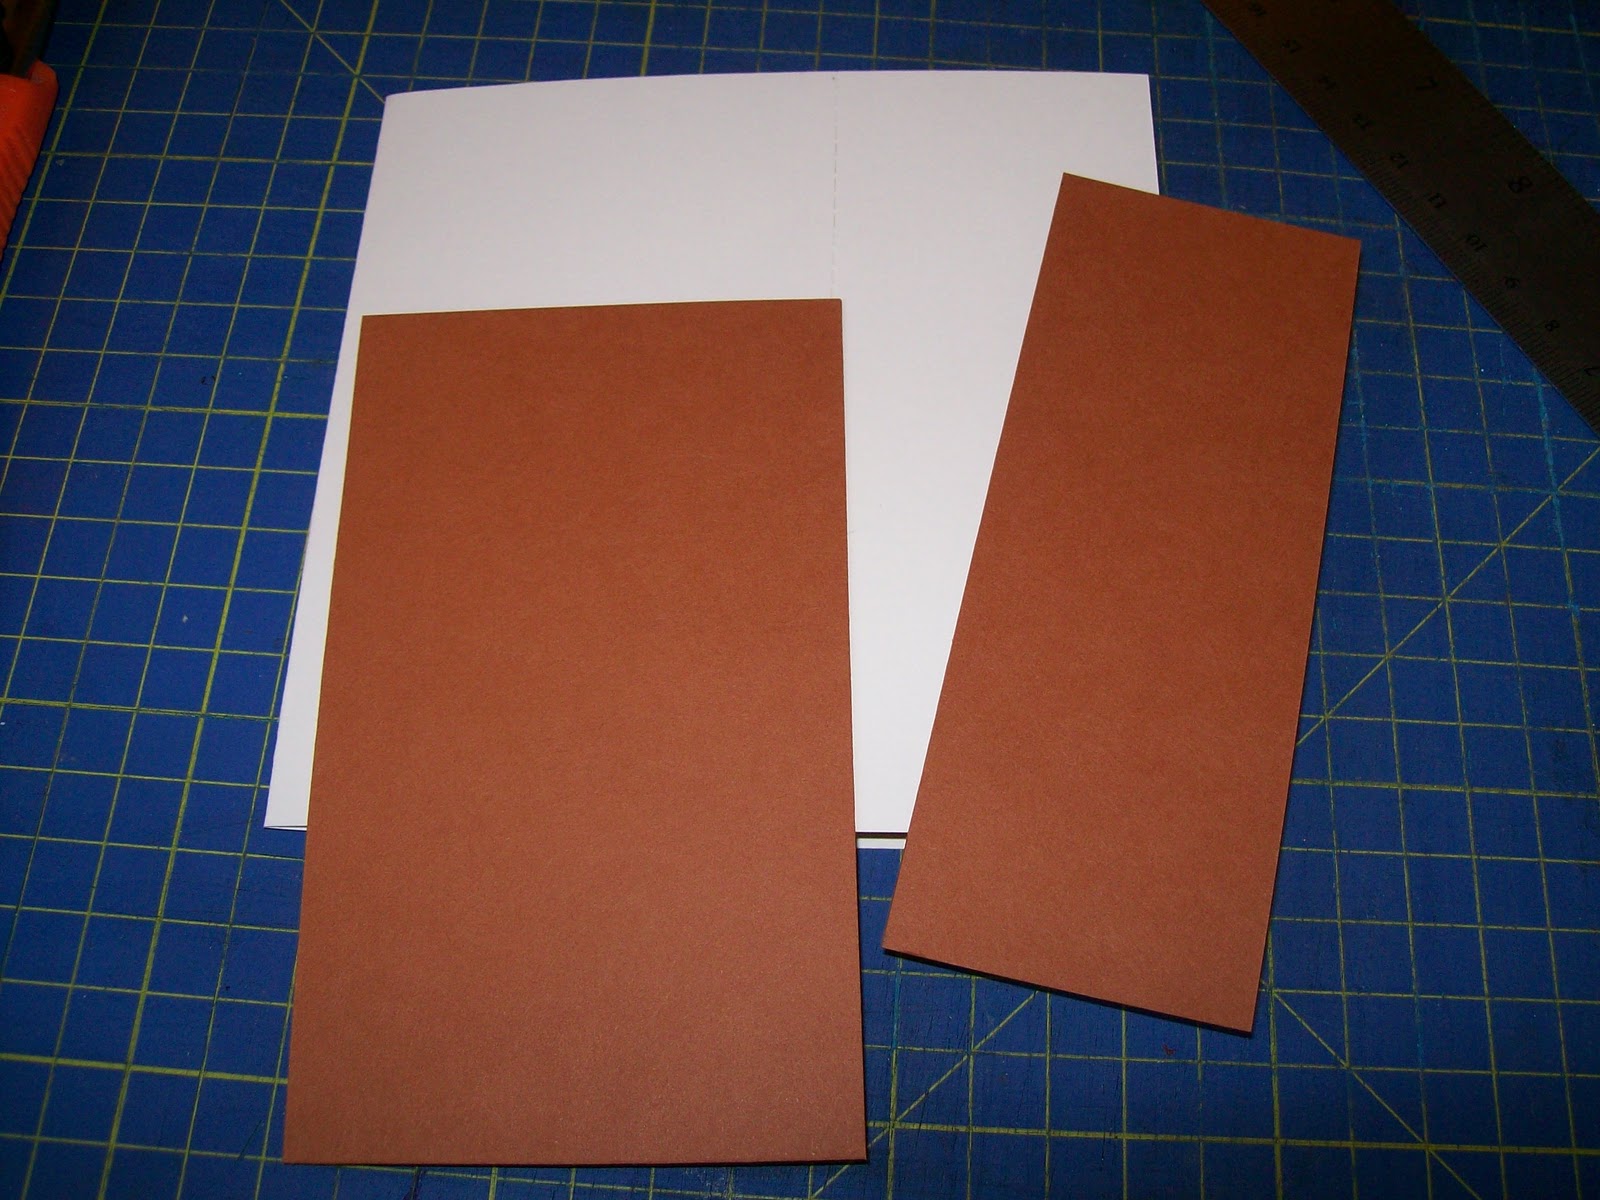 Next take some coloured card stock and cut two pieces - one to fit ...